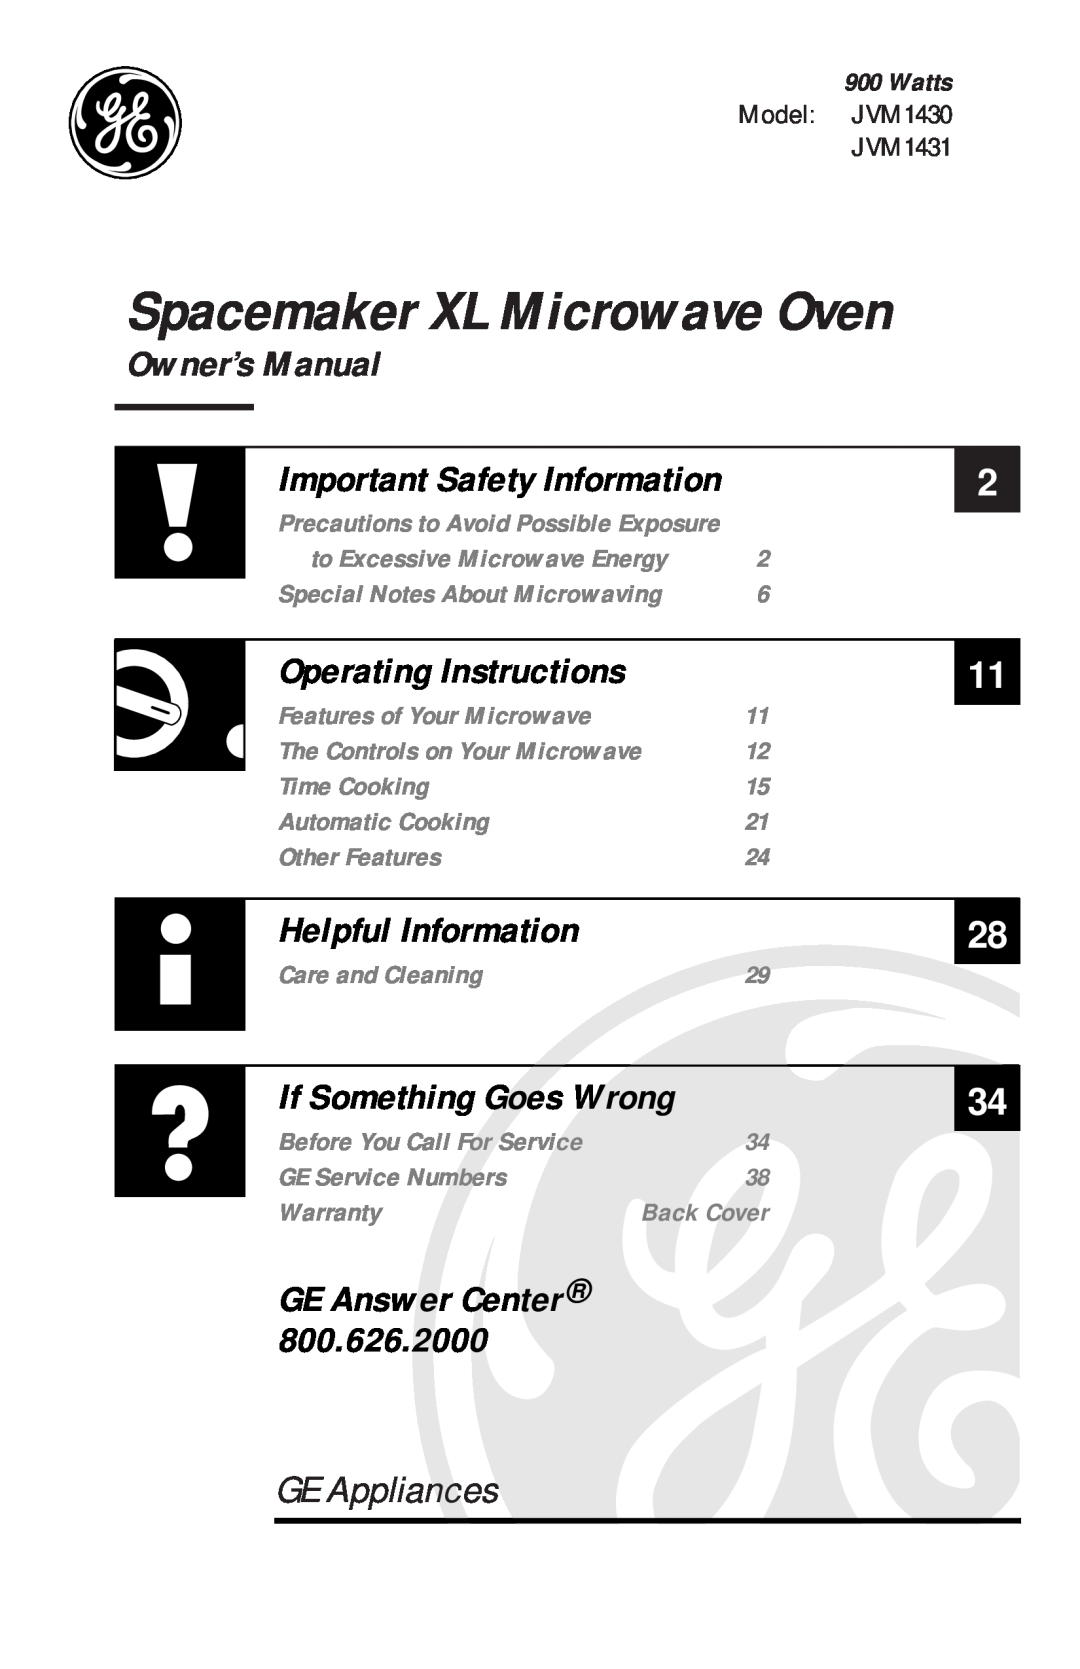 GE JVM1431 manual Watts, Spacemaker XL Microwave Oven, GE Appliances, Operating Instructions, Helpful Information 